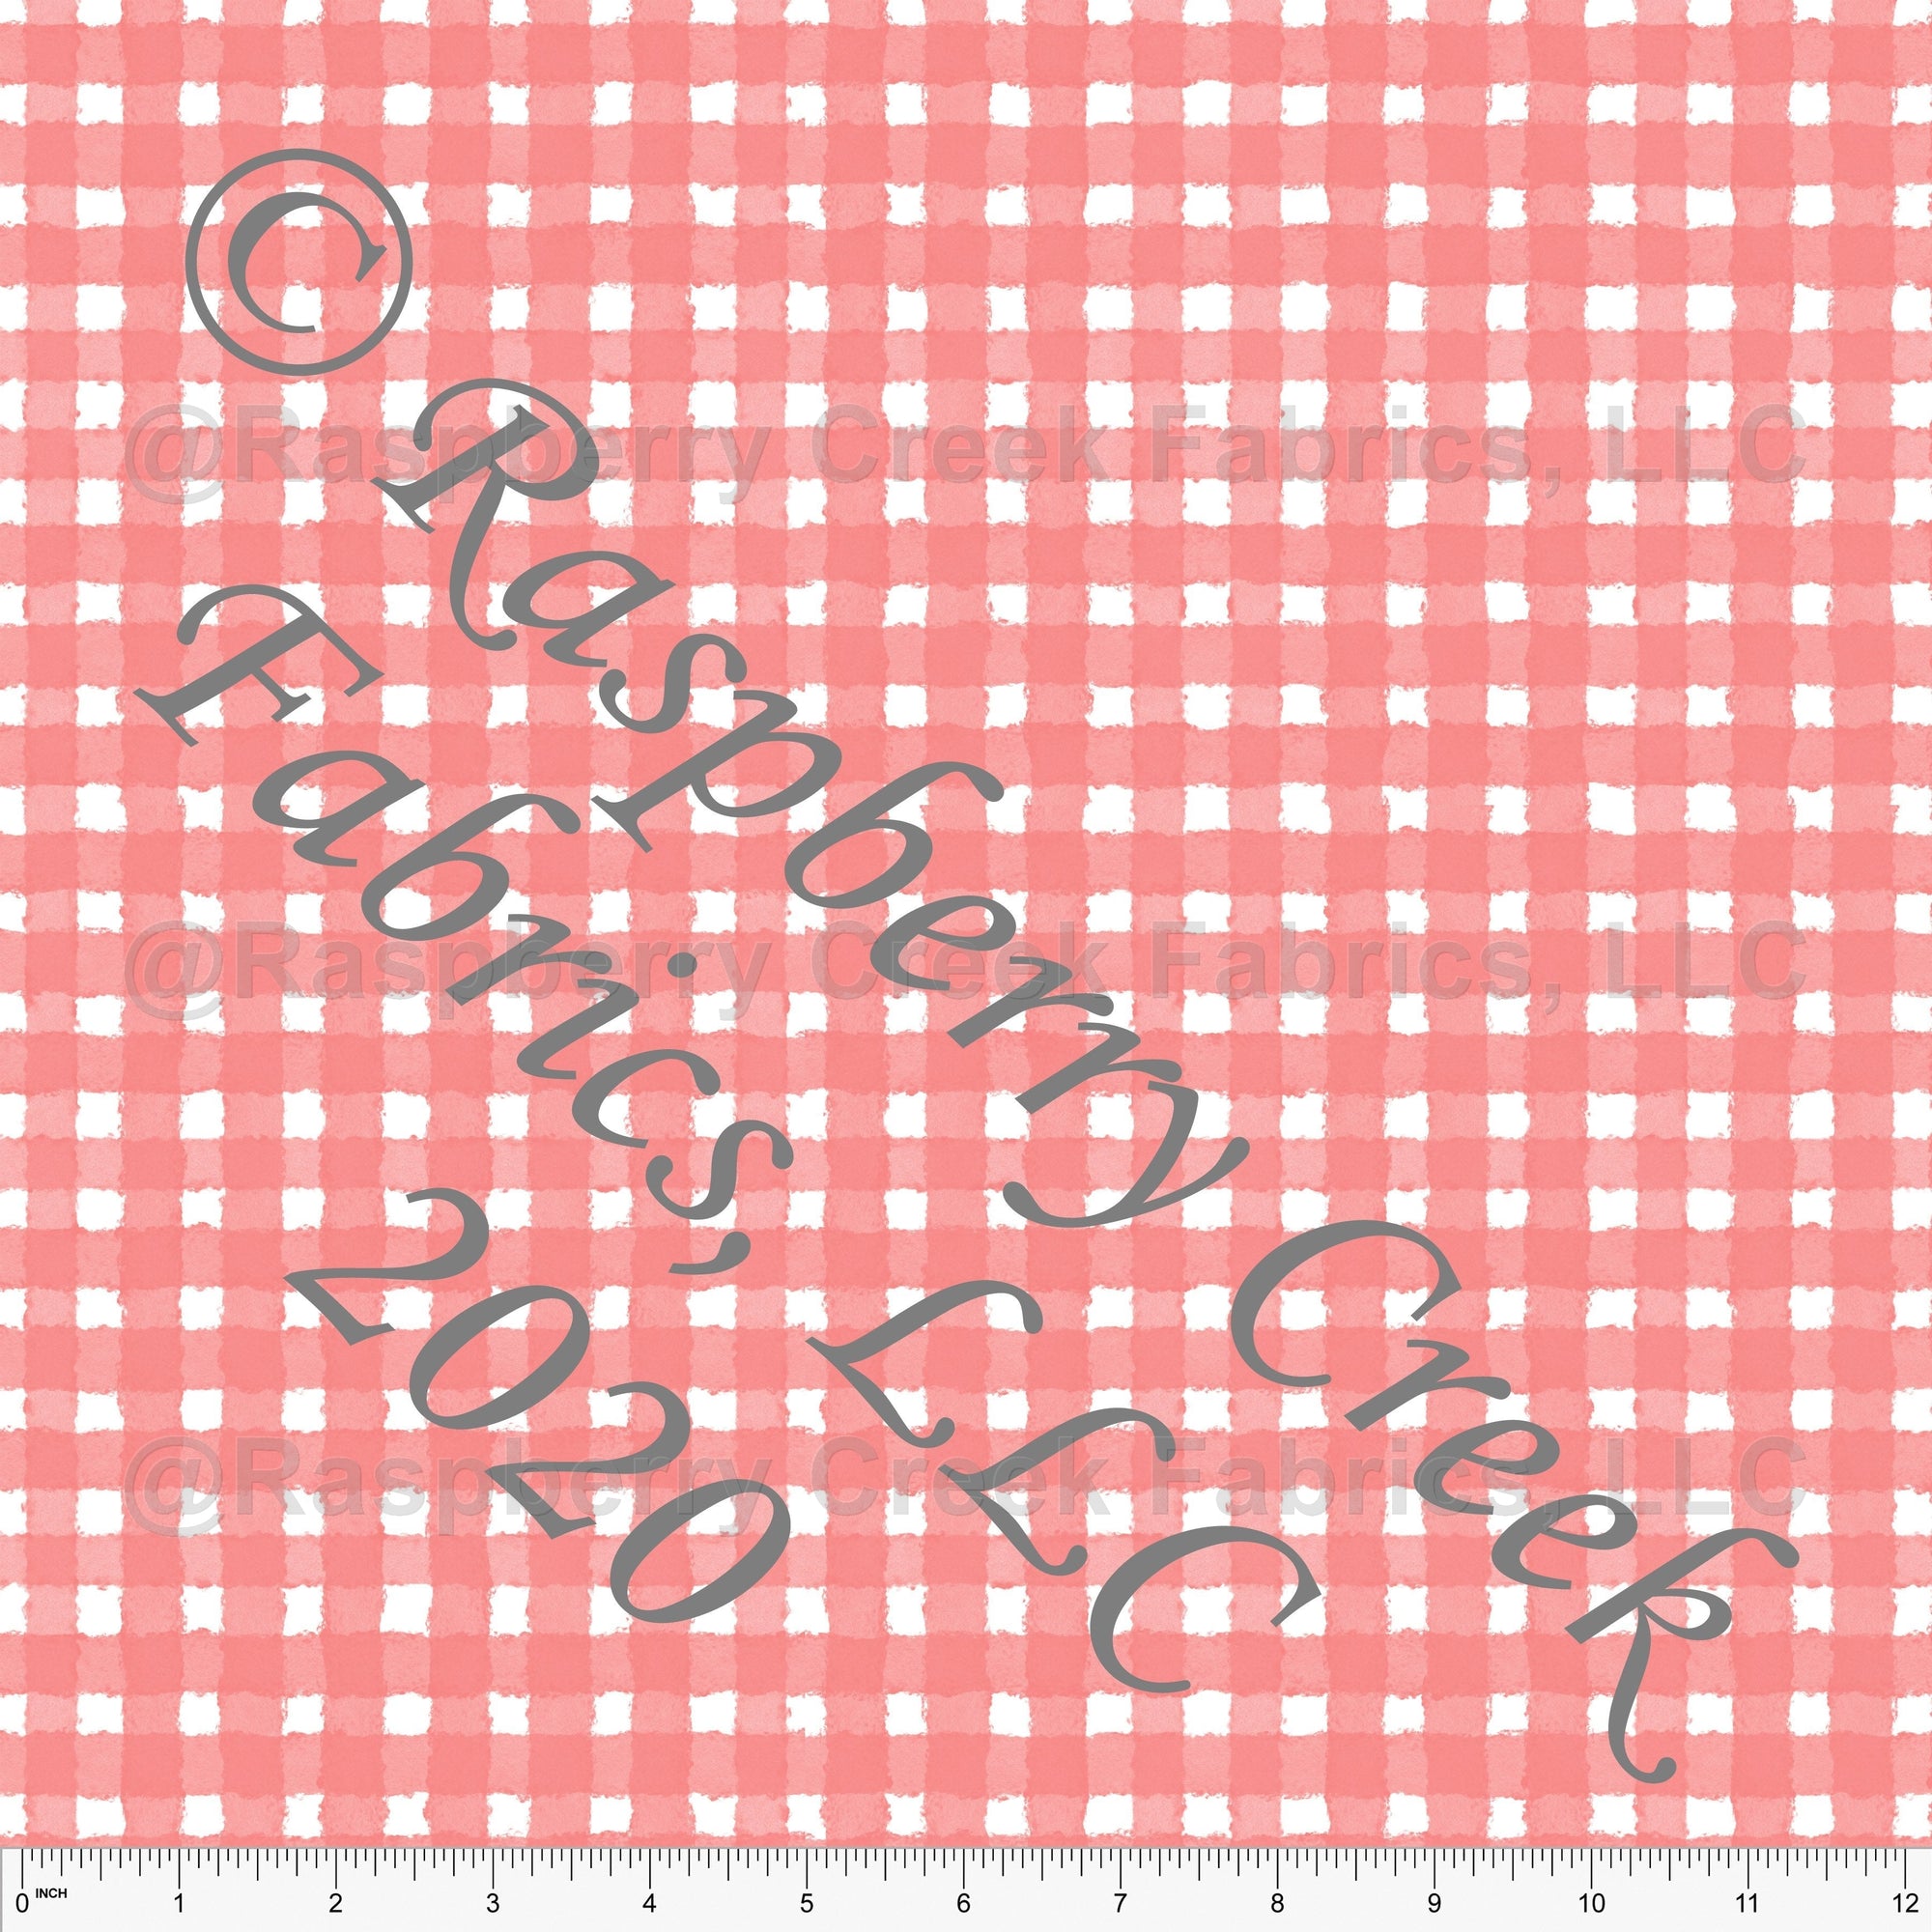 Coral and White Painted Check Gingham, By Bri Powell for Club Fabrics Fabric, Raspberry Creek Fabrics, watermarked